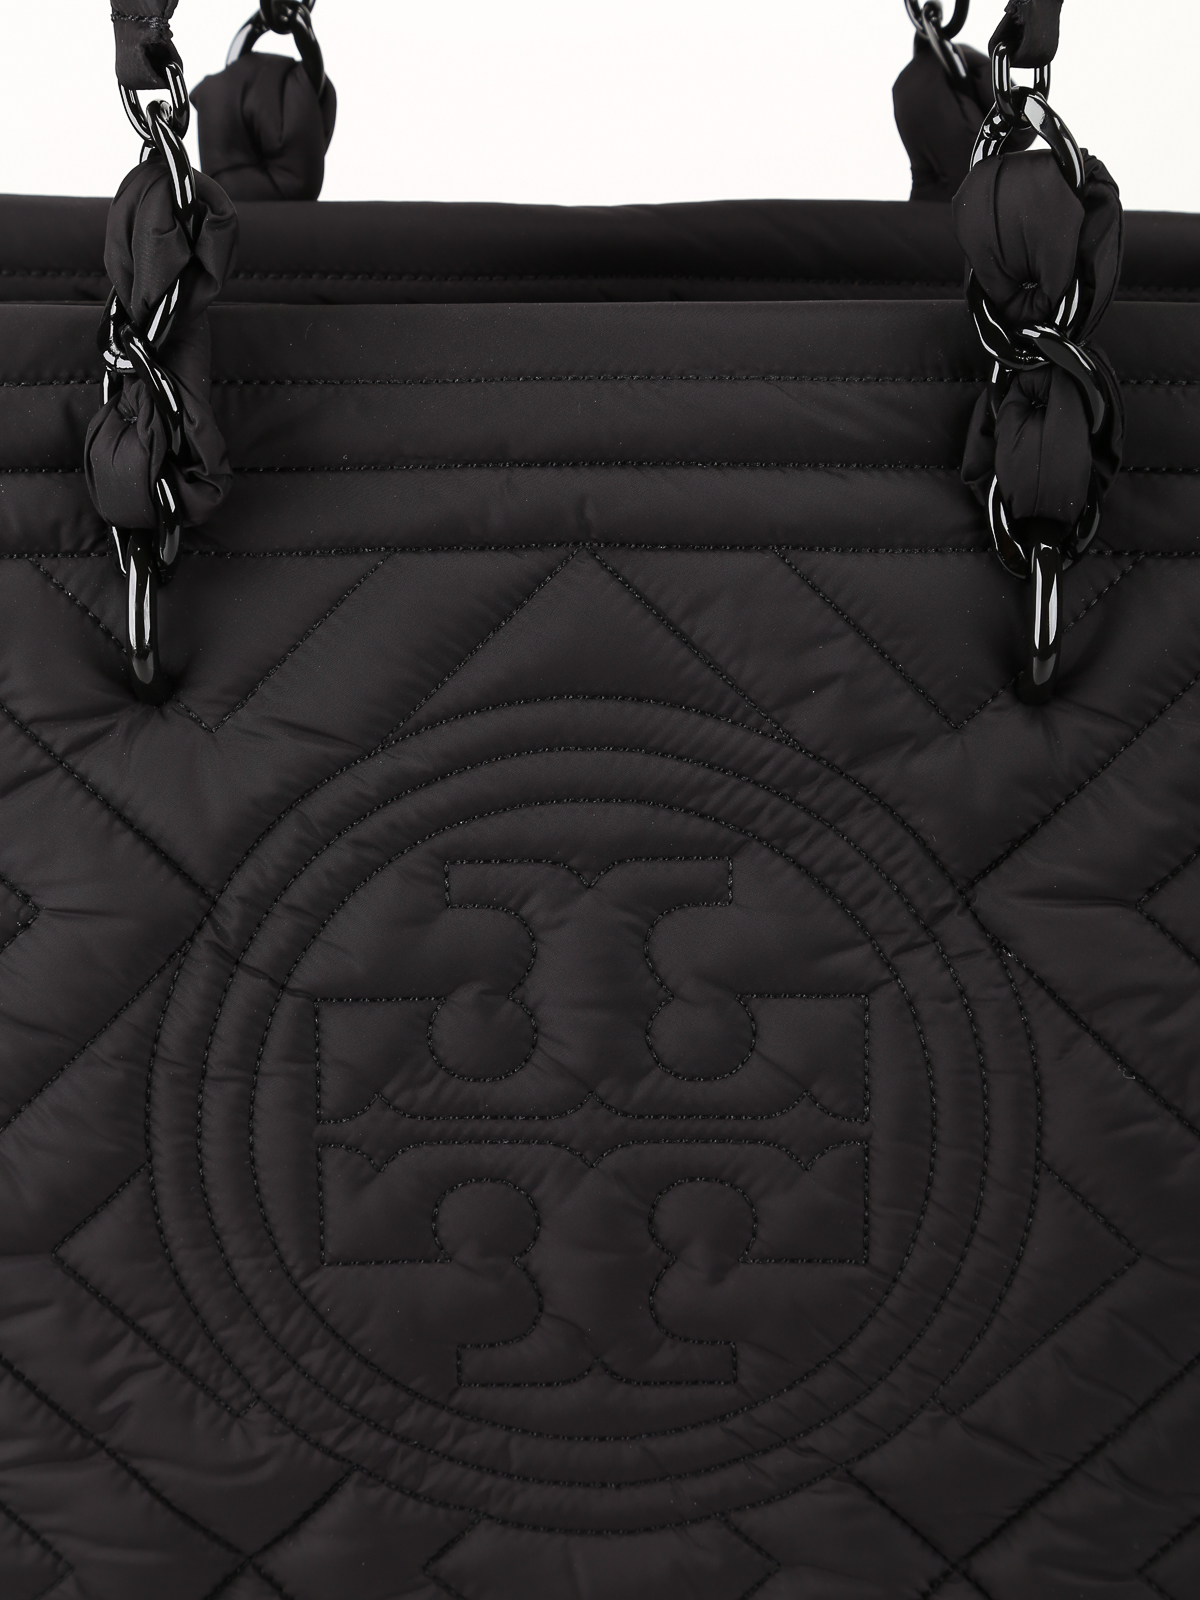 Introducir 49+ imagen tory burch quilted nylon tote